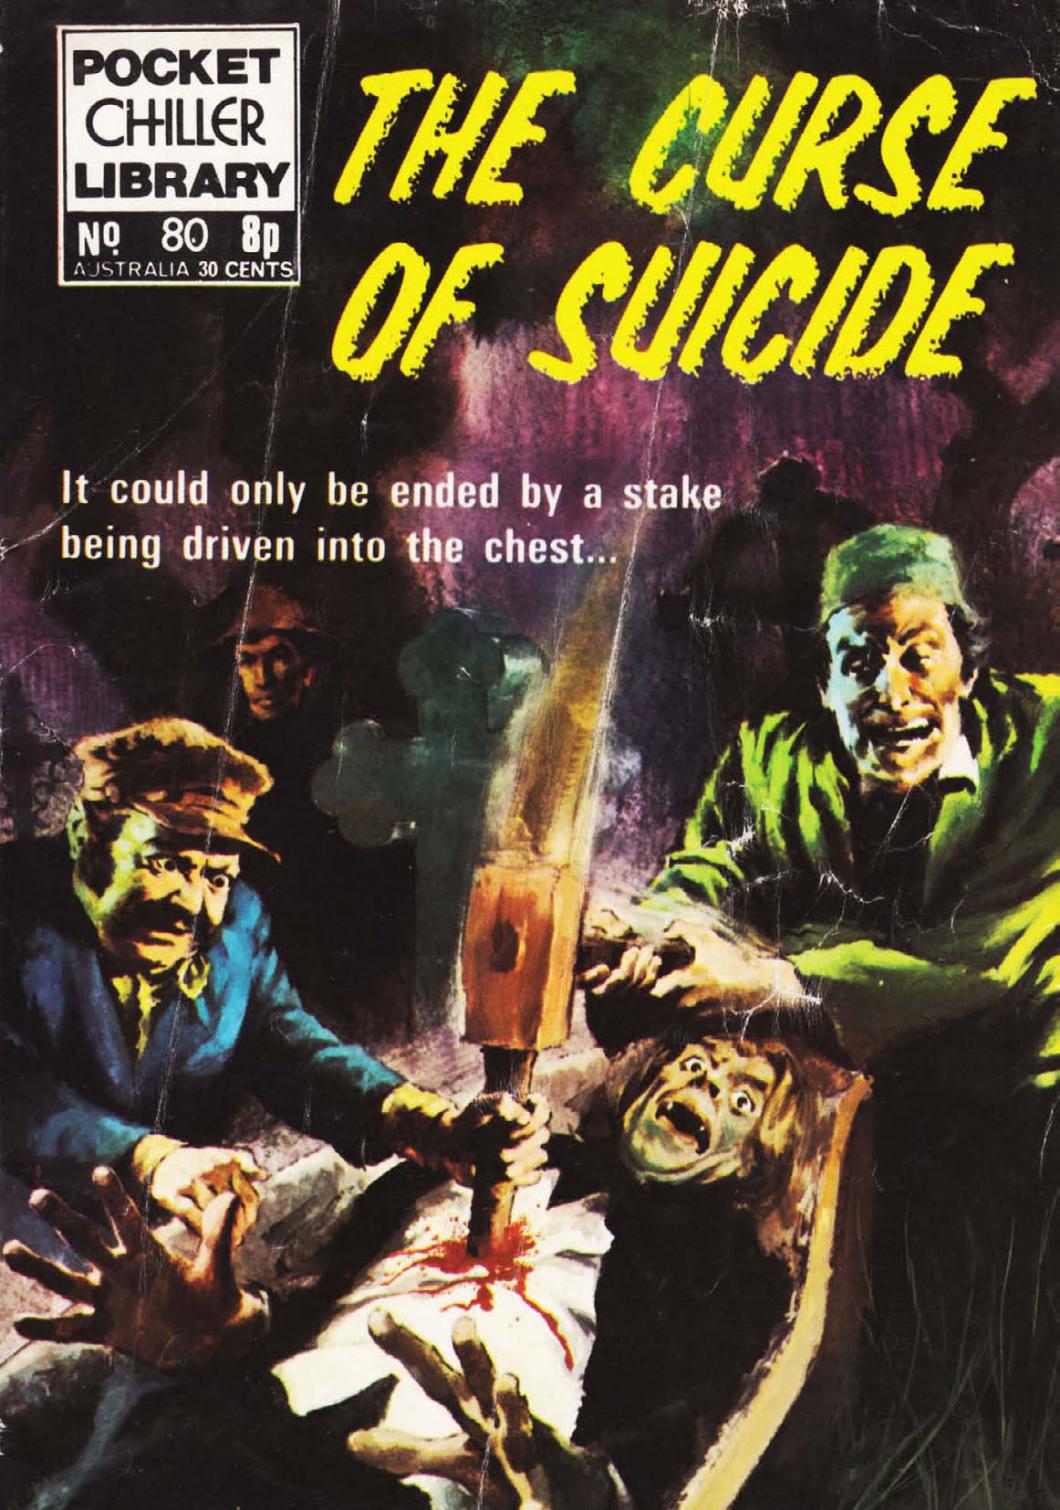 Pocket Chiller Library 80 - The Curse of Suicide